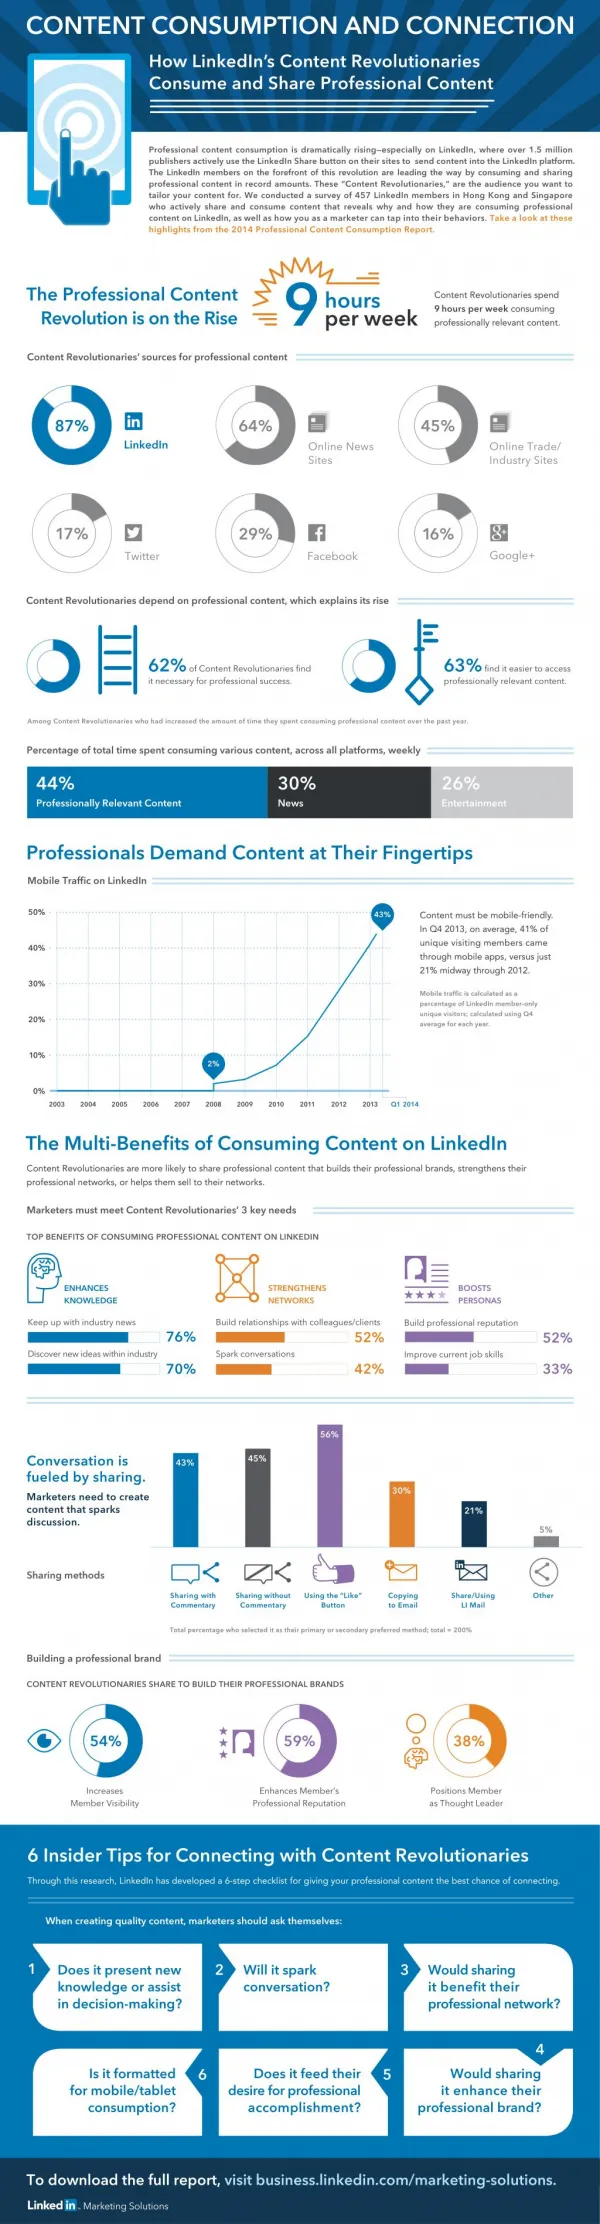 LinkedIn conducted a survey on active LinkedIn members in Hong Kong and Singapore that reveals why and how they are cons